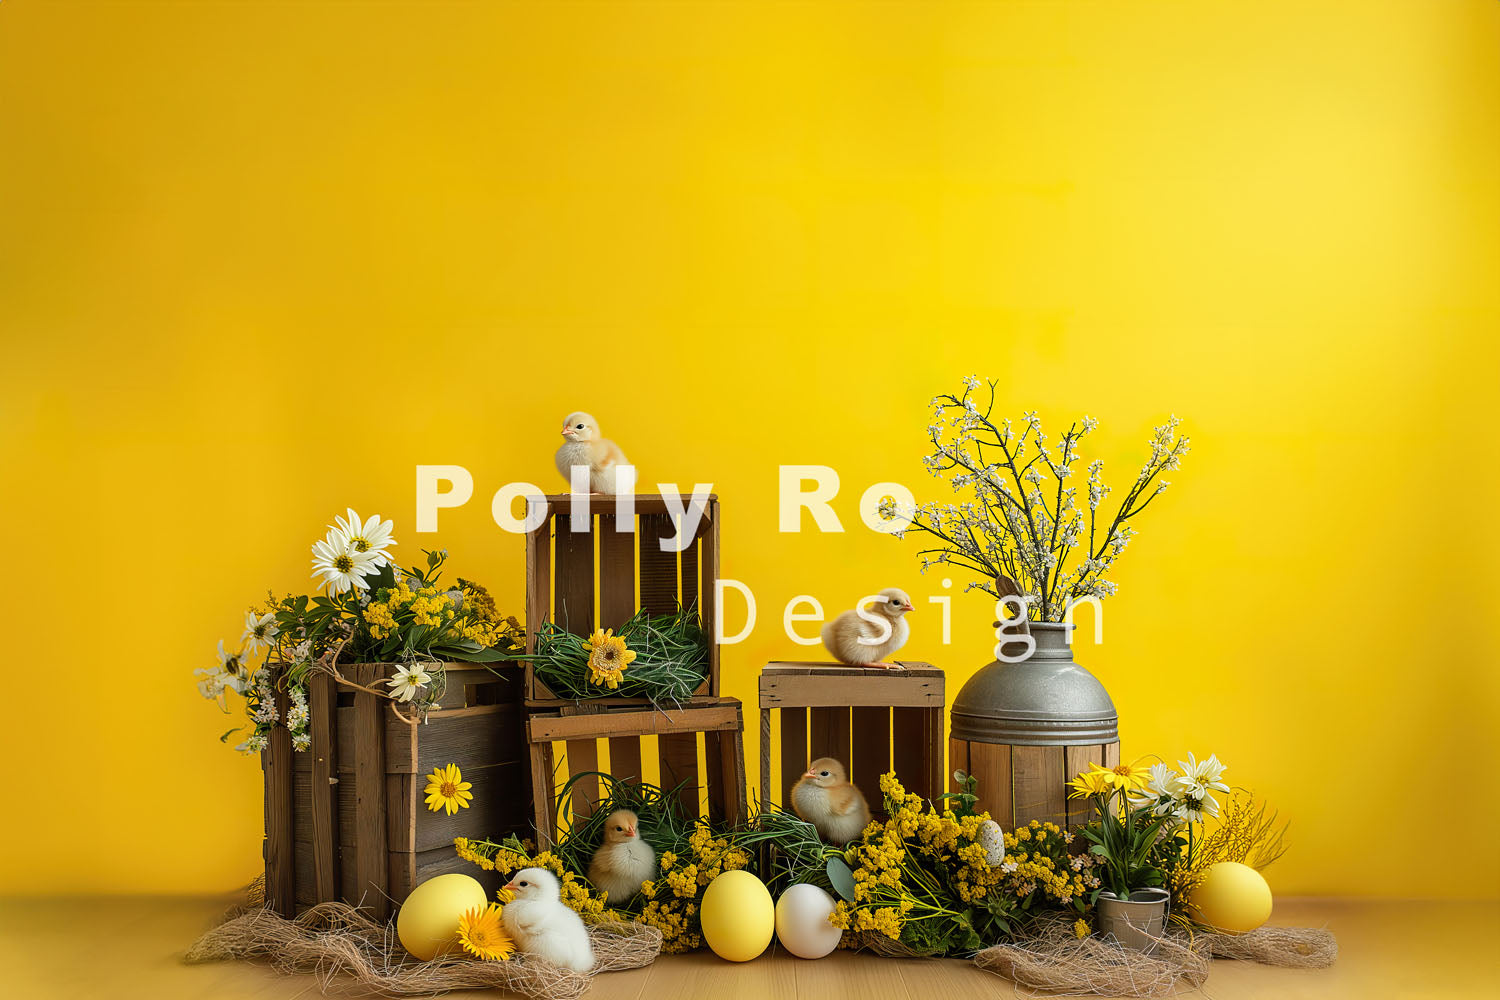 Special Offers Avezano Easter Yellow Wall Photography Backdrop Designed By Polly Ro Design